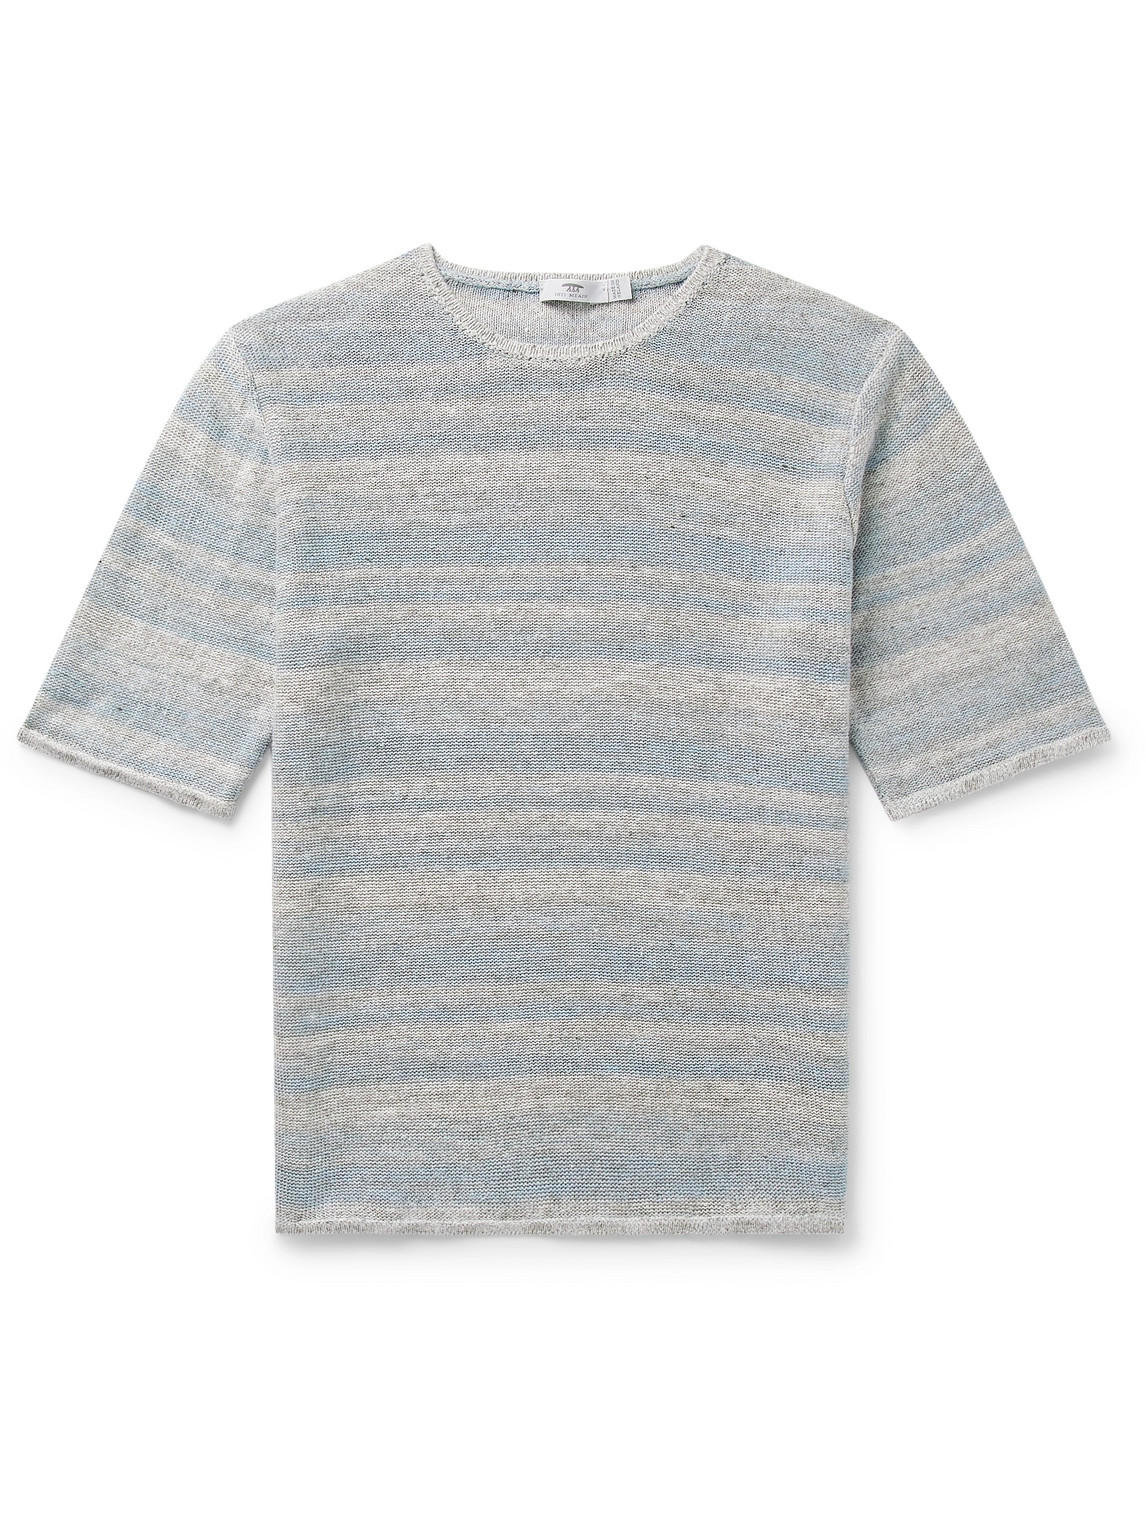 Inis Meain Striped Linen T-shirt In Blue